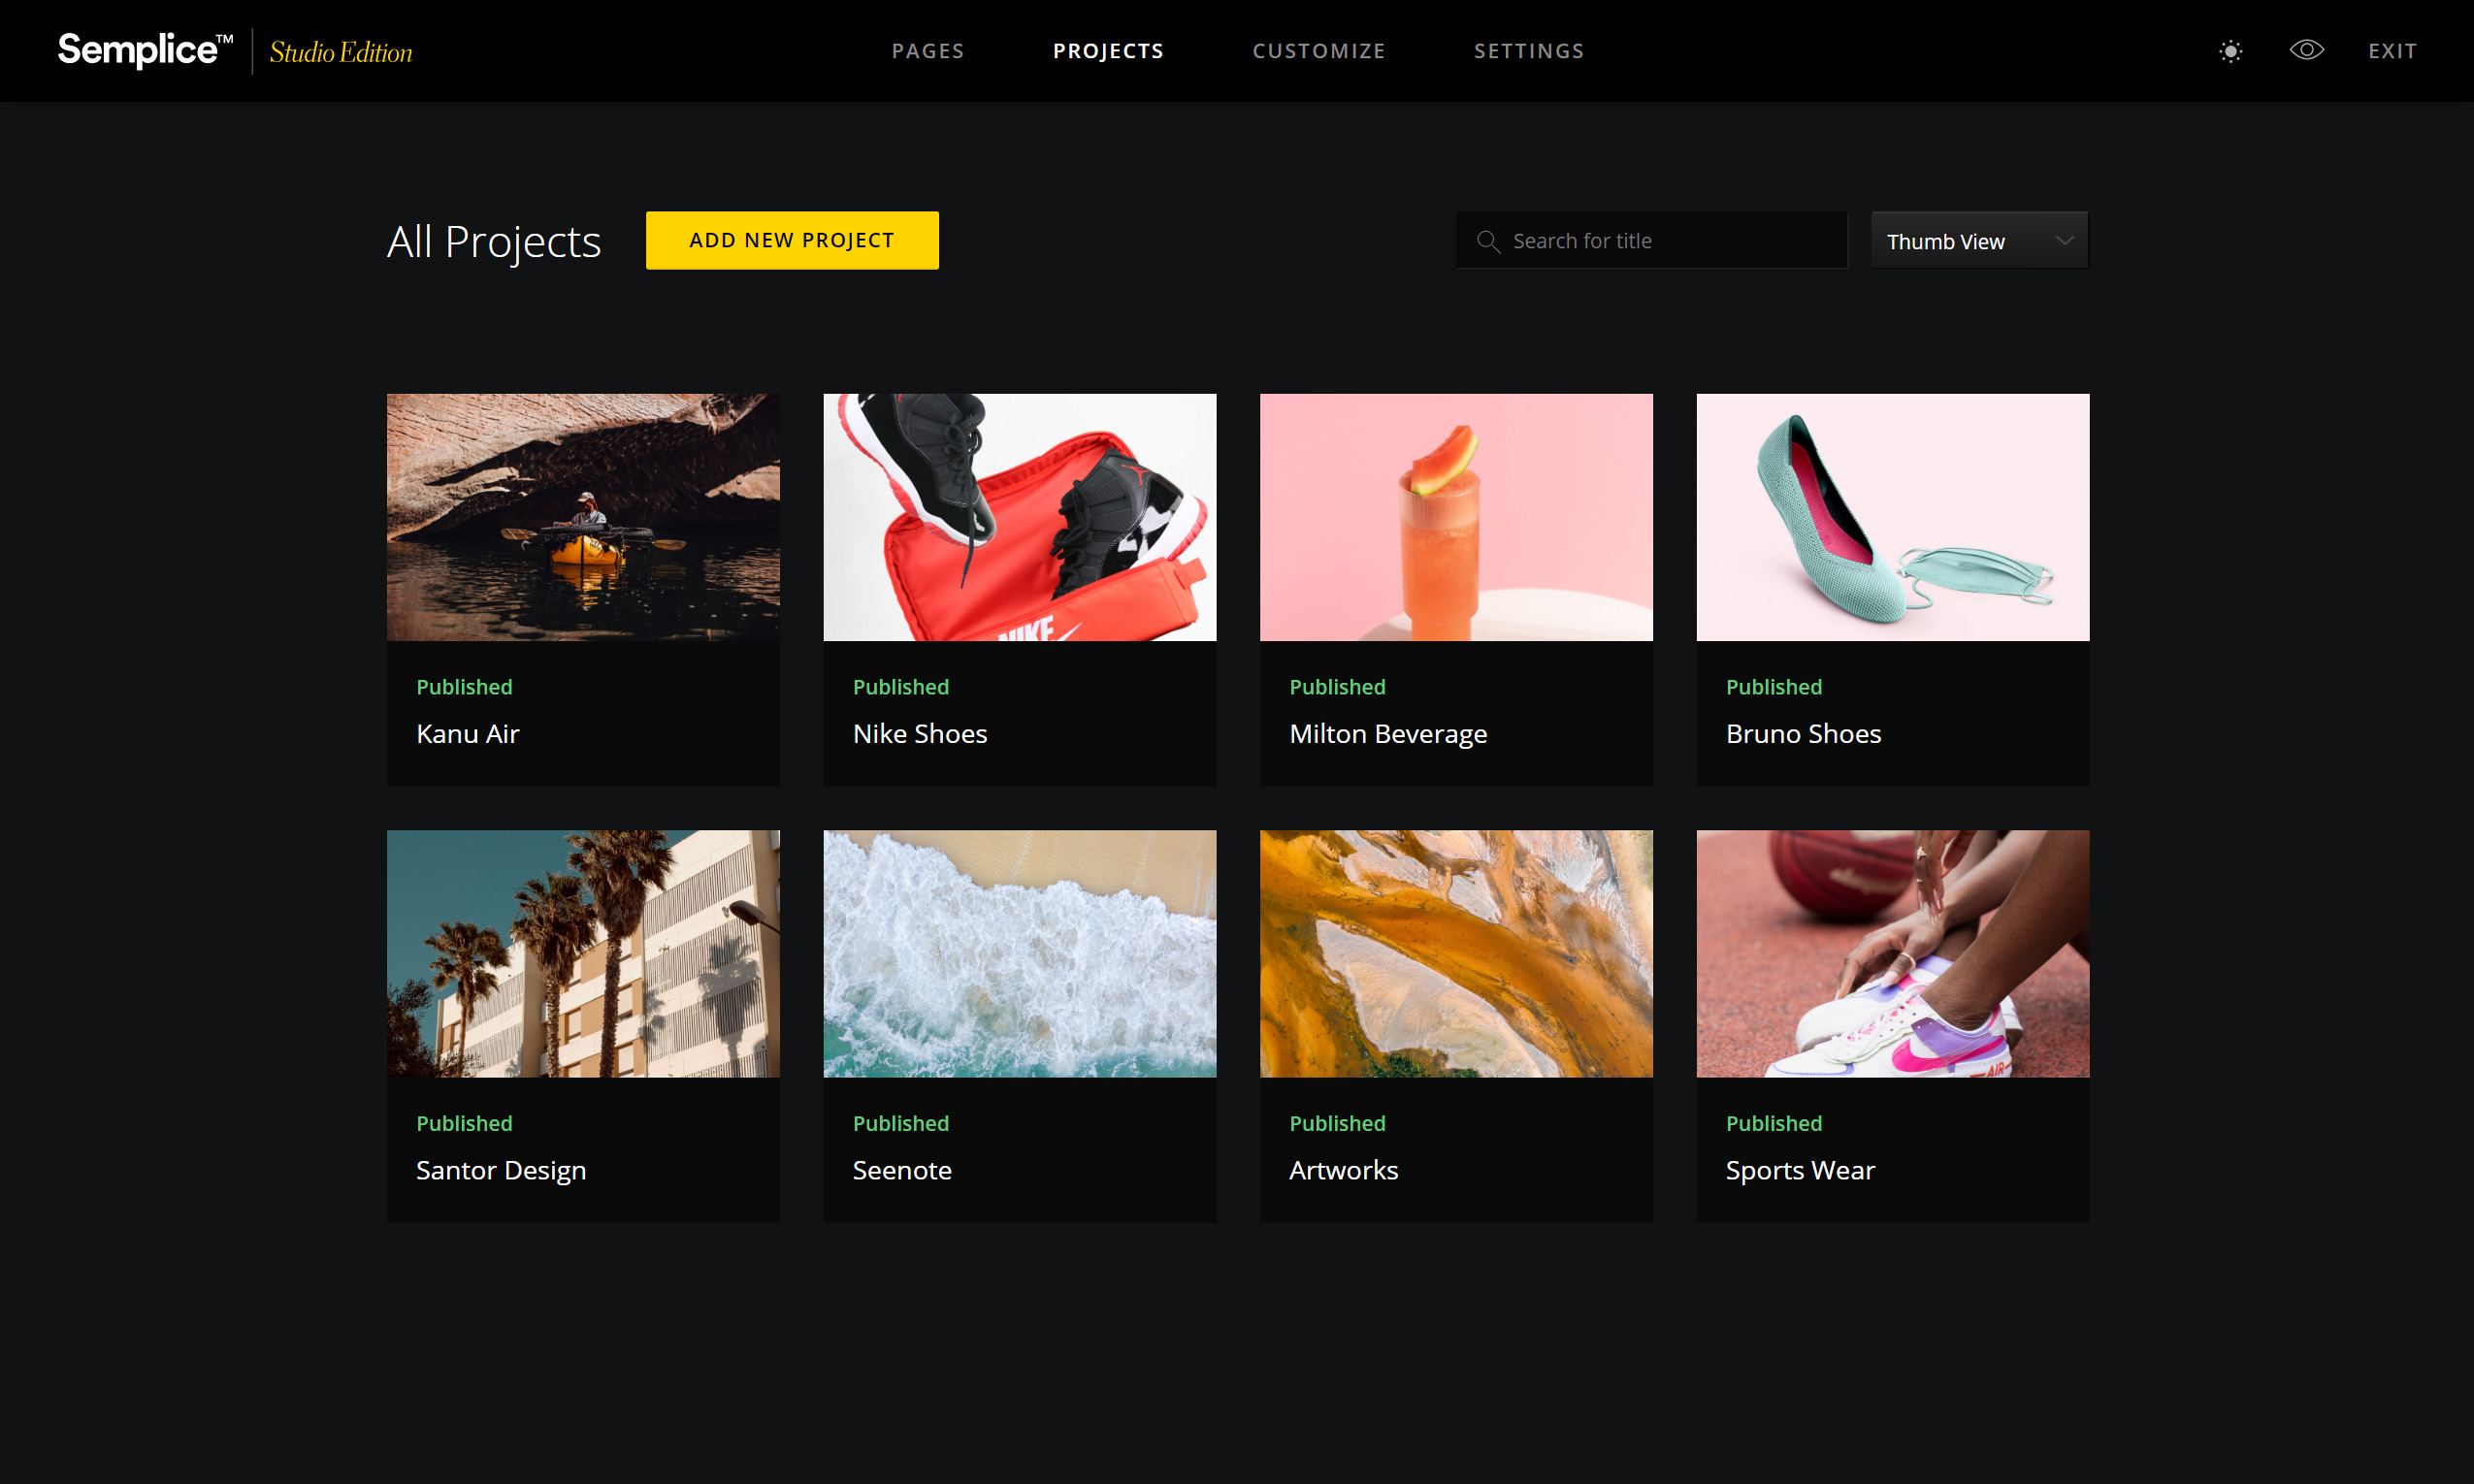 semplice_projects